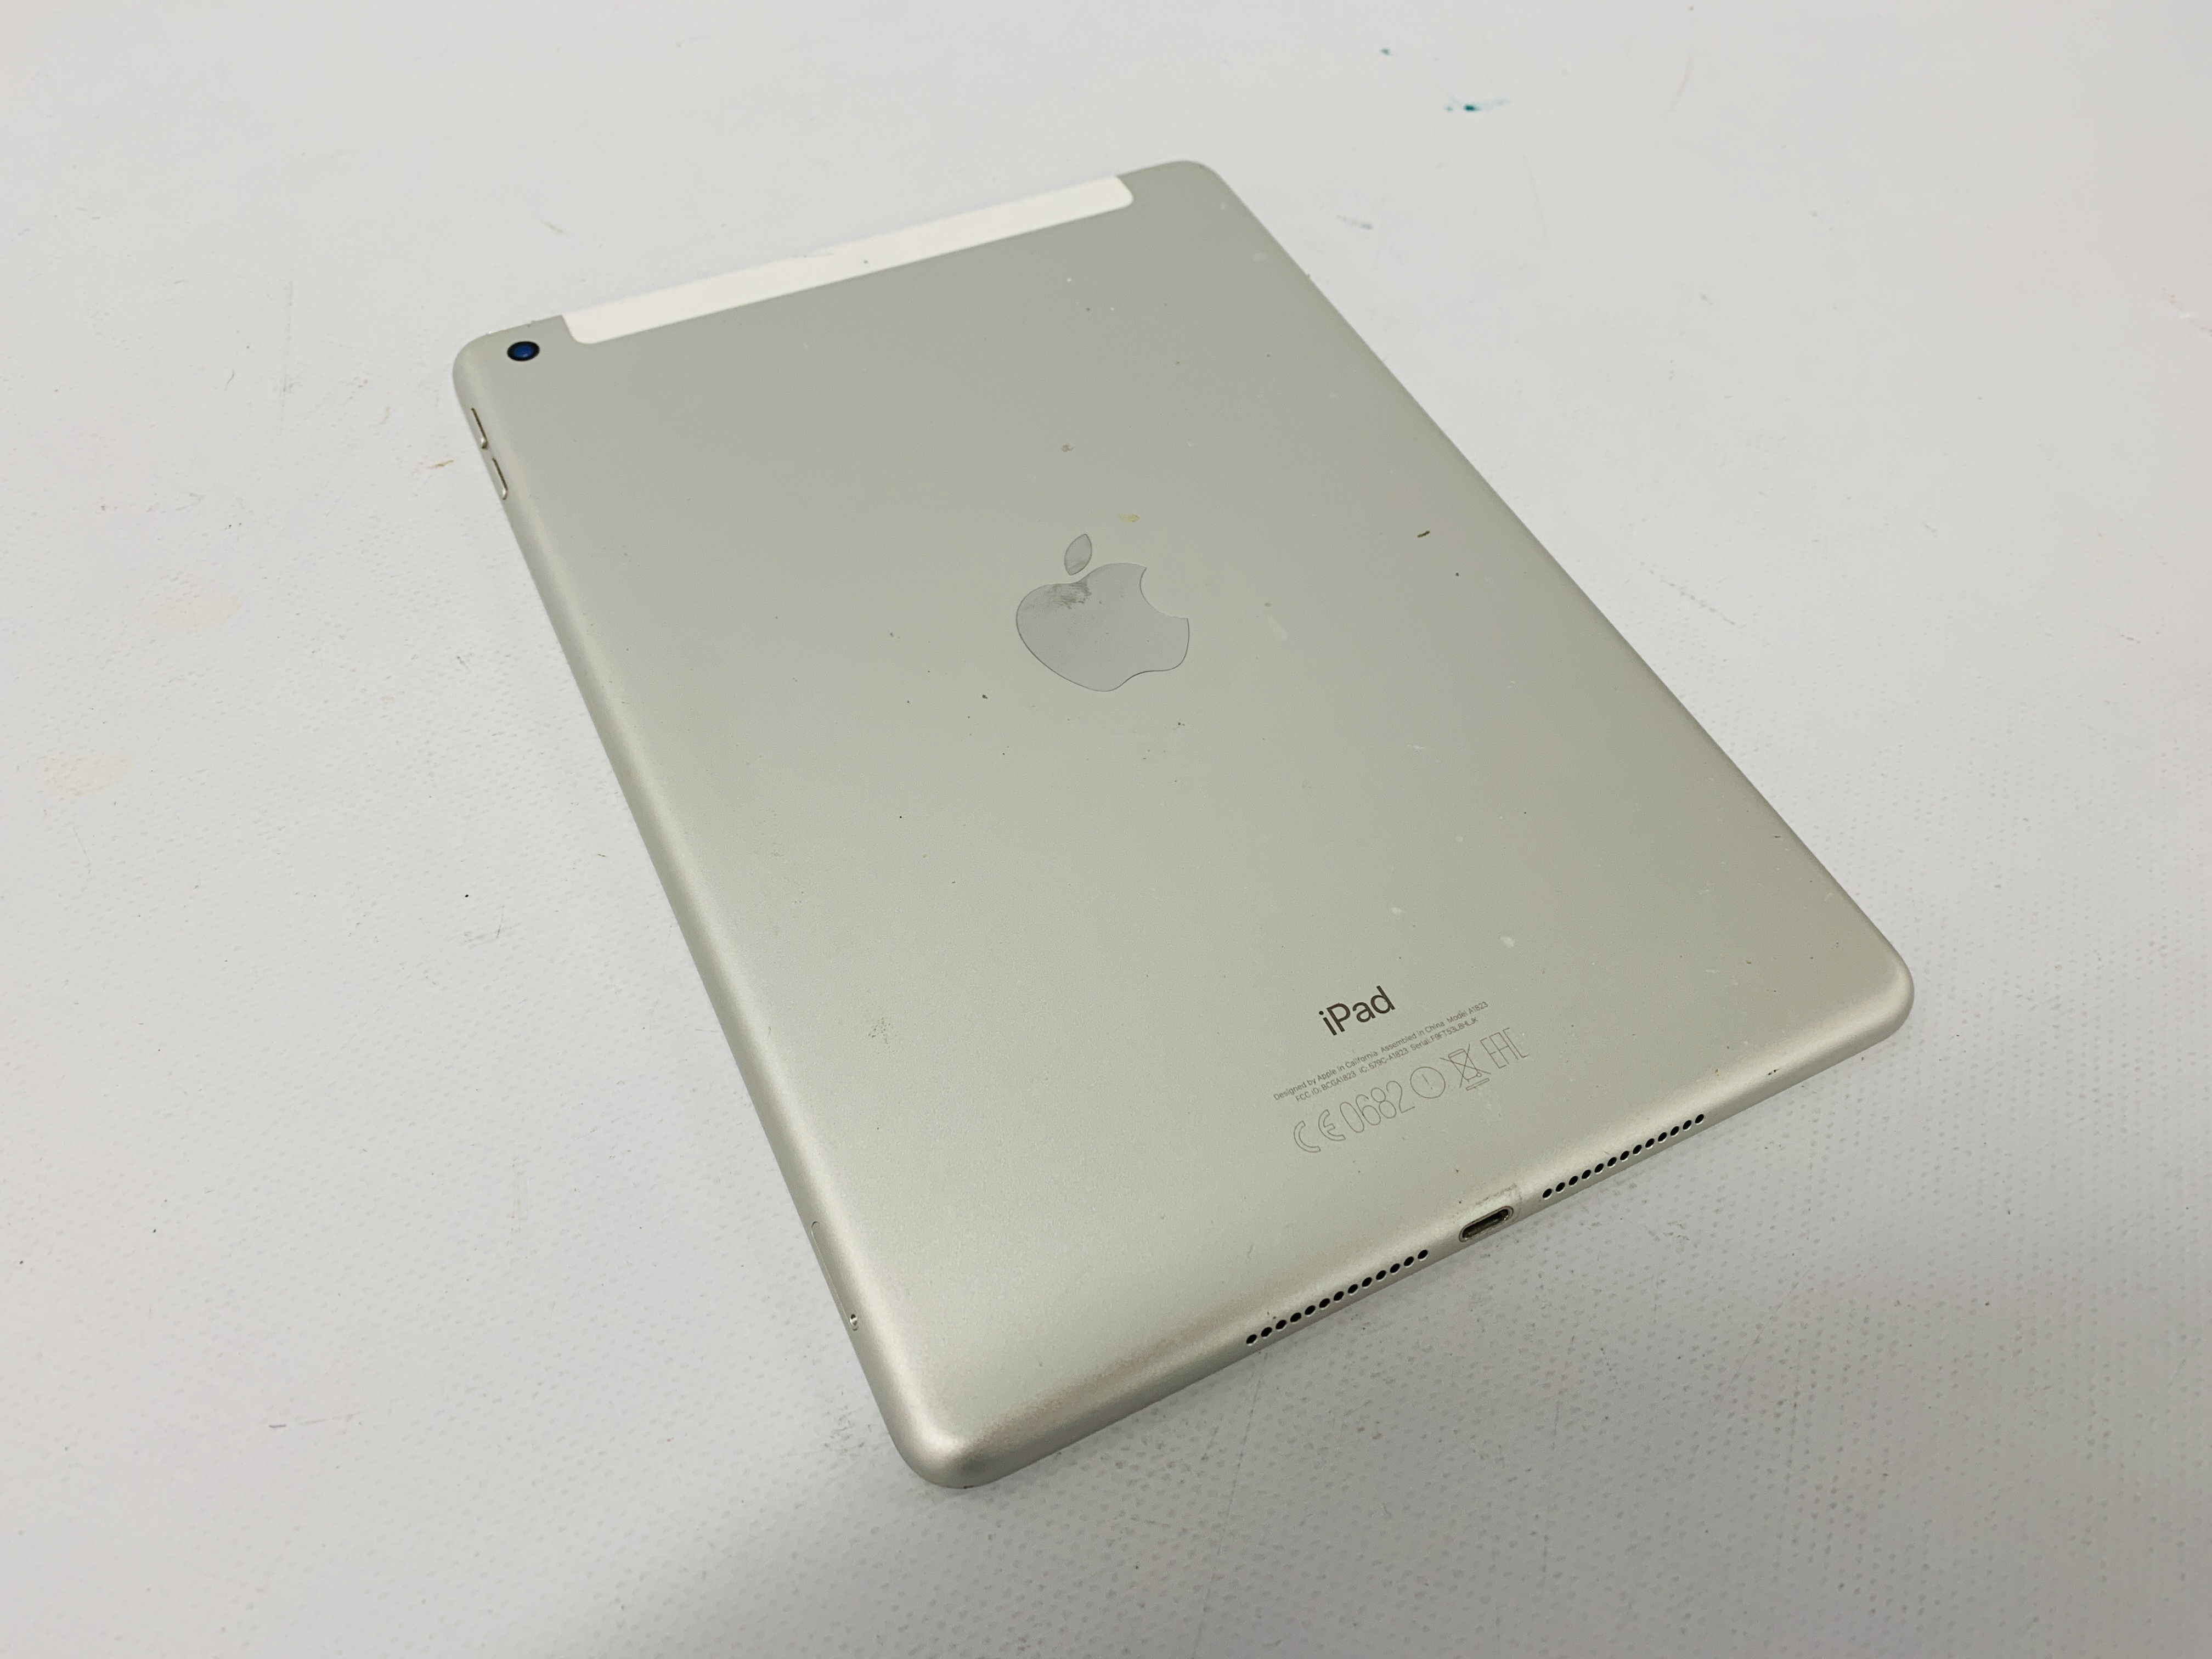 APPLE IPAD AIR, CELLULAR MODEL, MODEL A1823, SPARES & REPAIRS ONLY, - Image 2 of 2